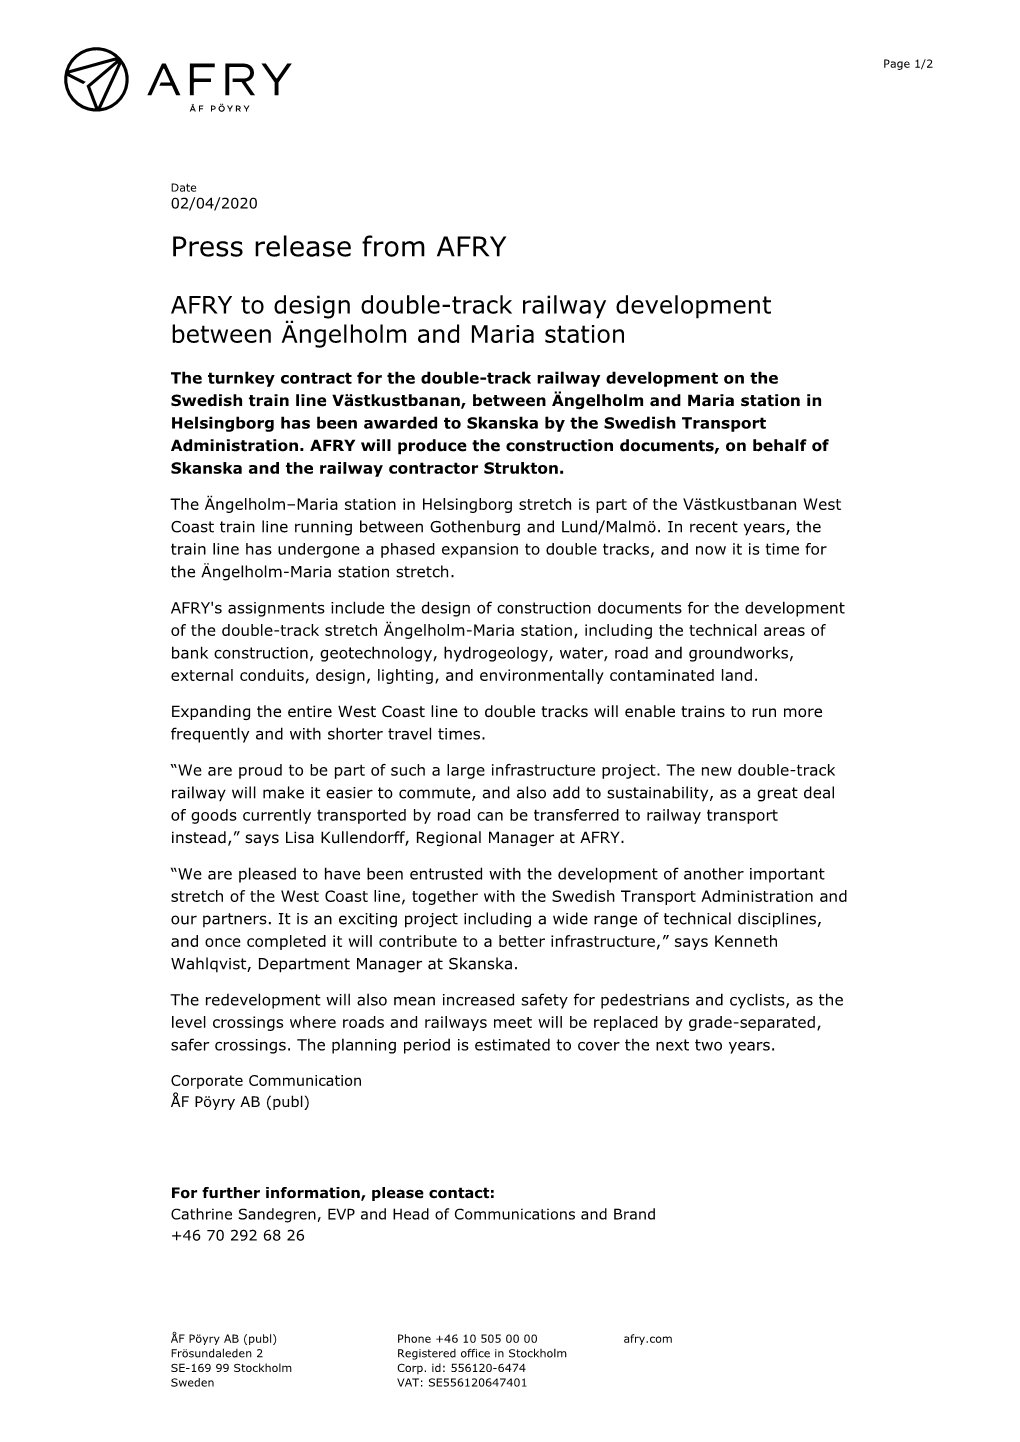 Press Release from AFRY